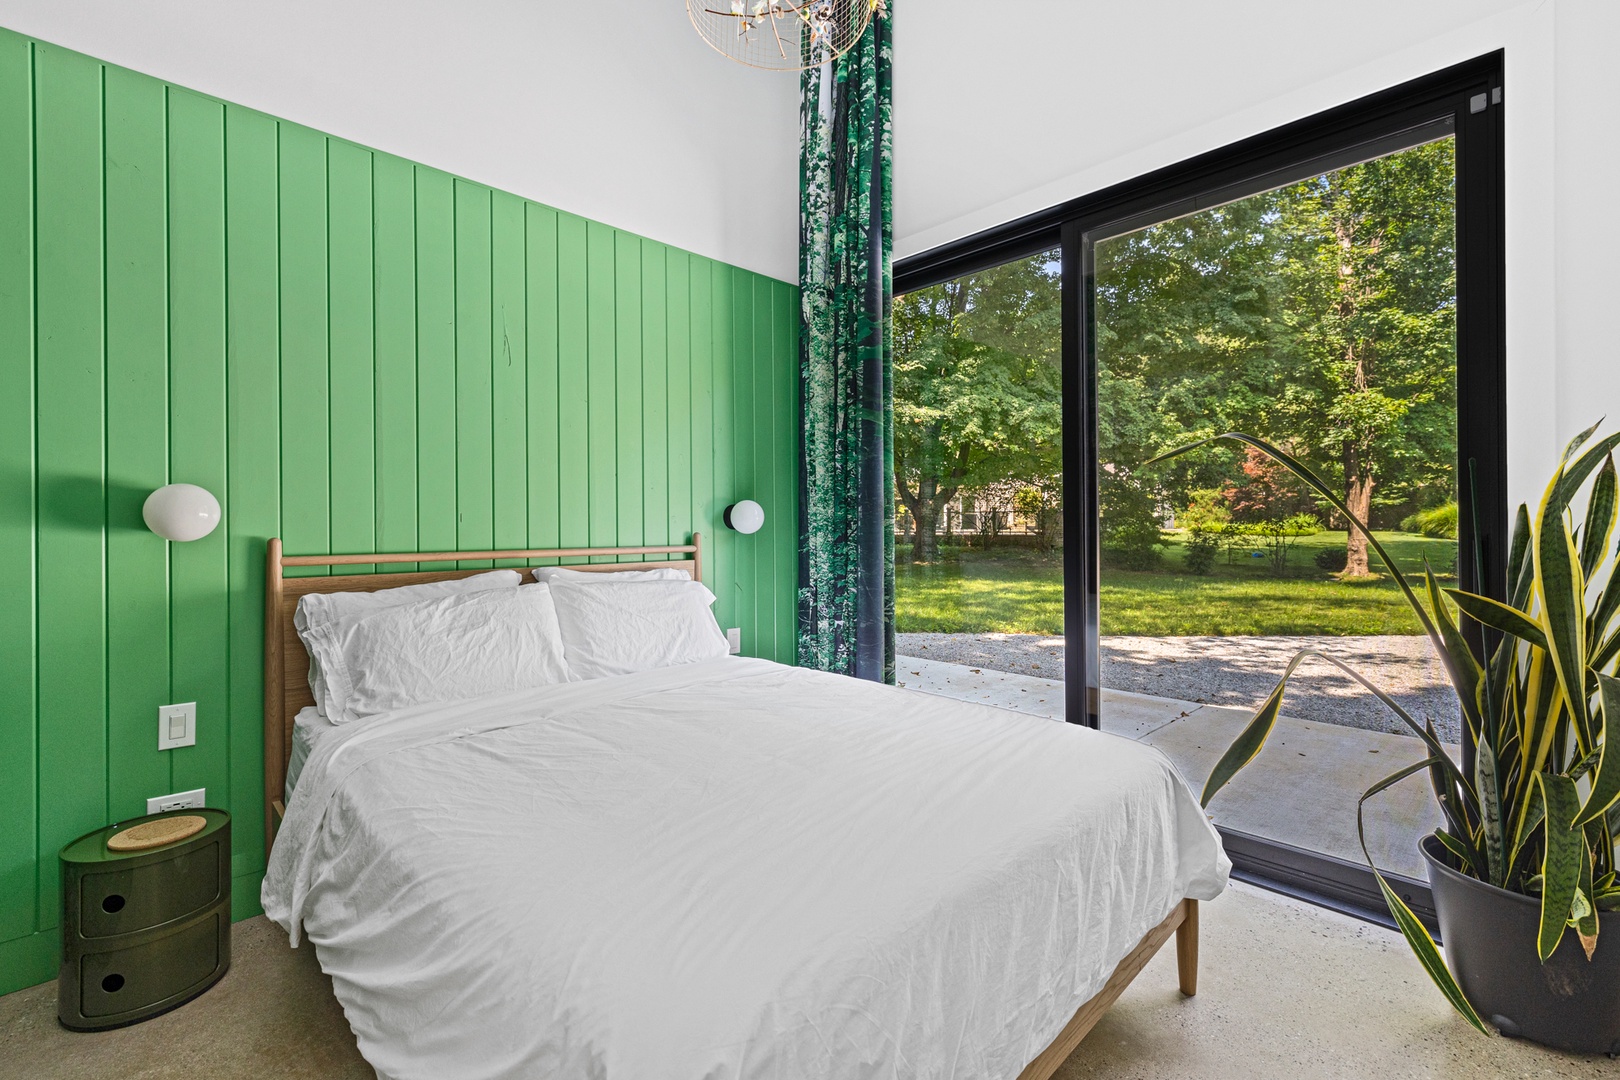 Owlwood's bedrooms offer everything you need for a restful and rejuvenating stay.